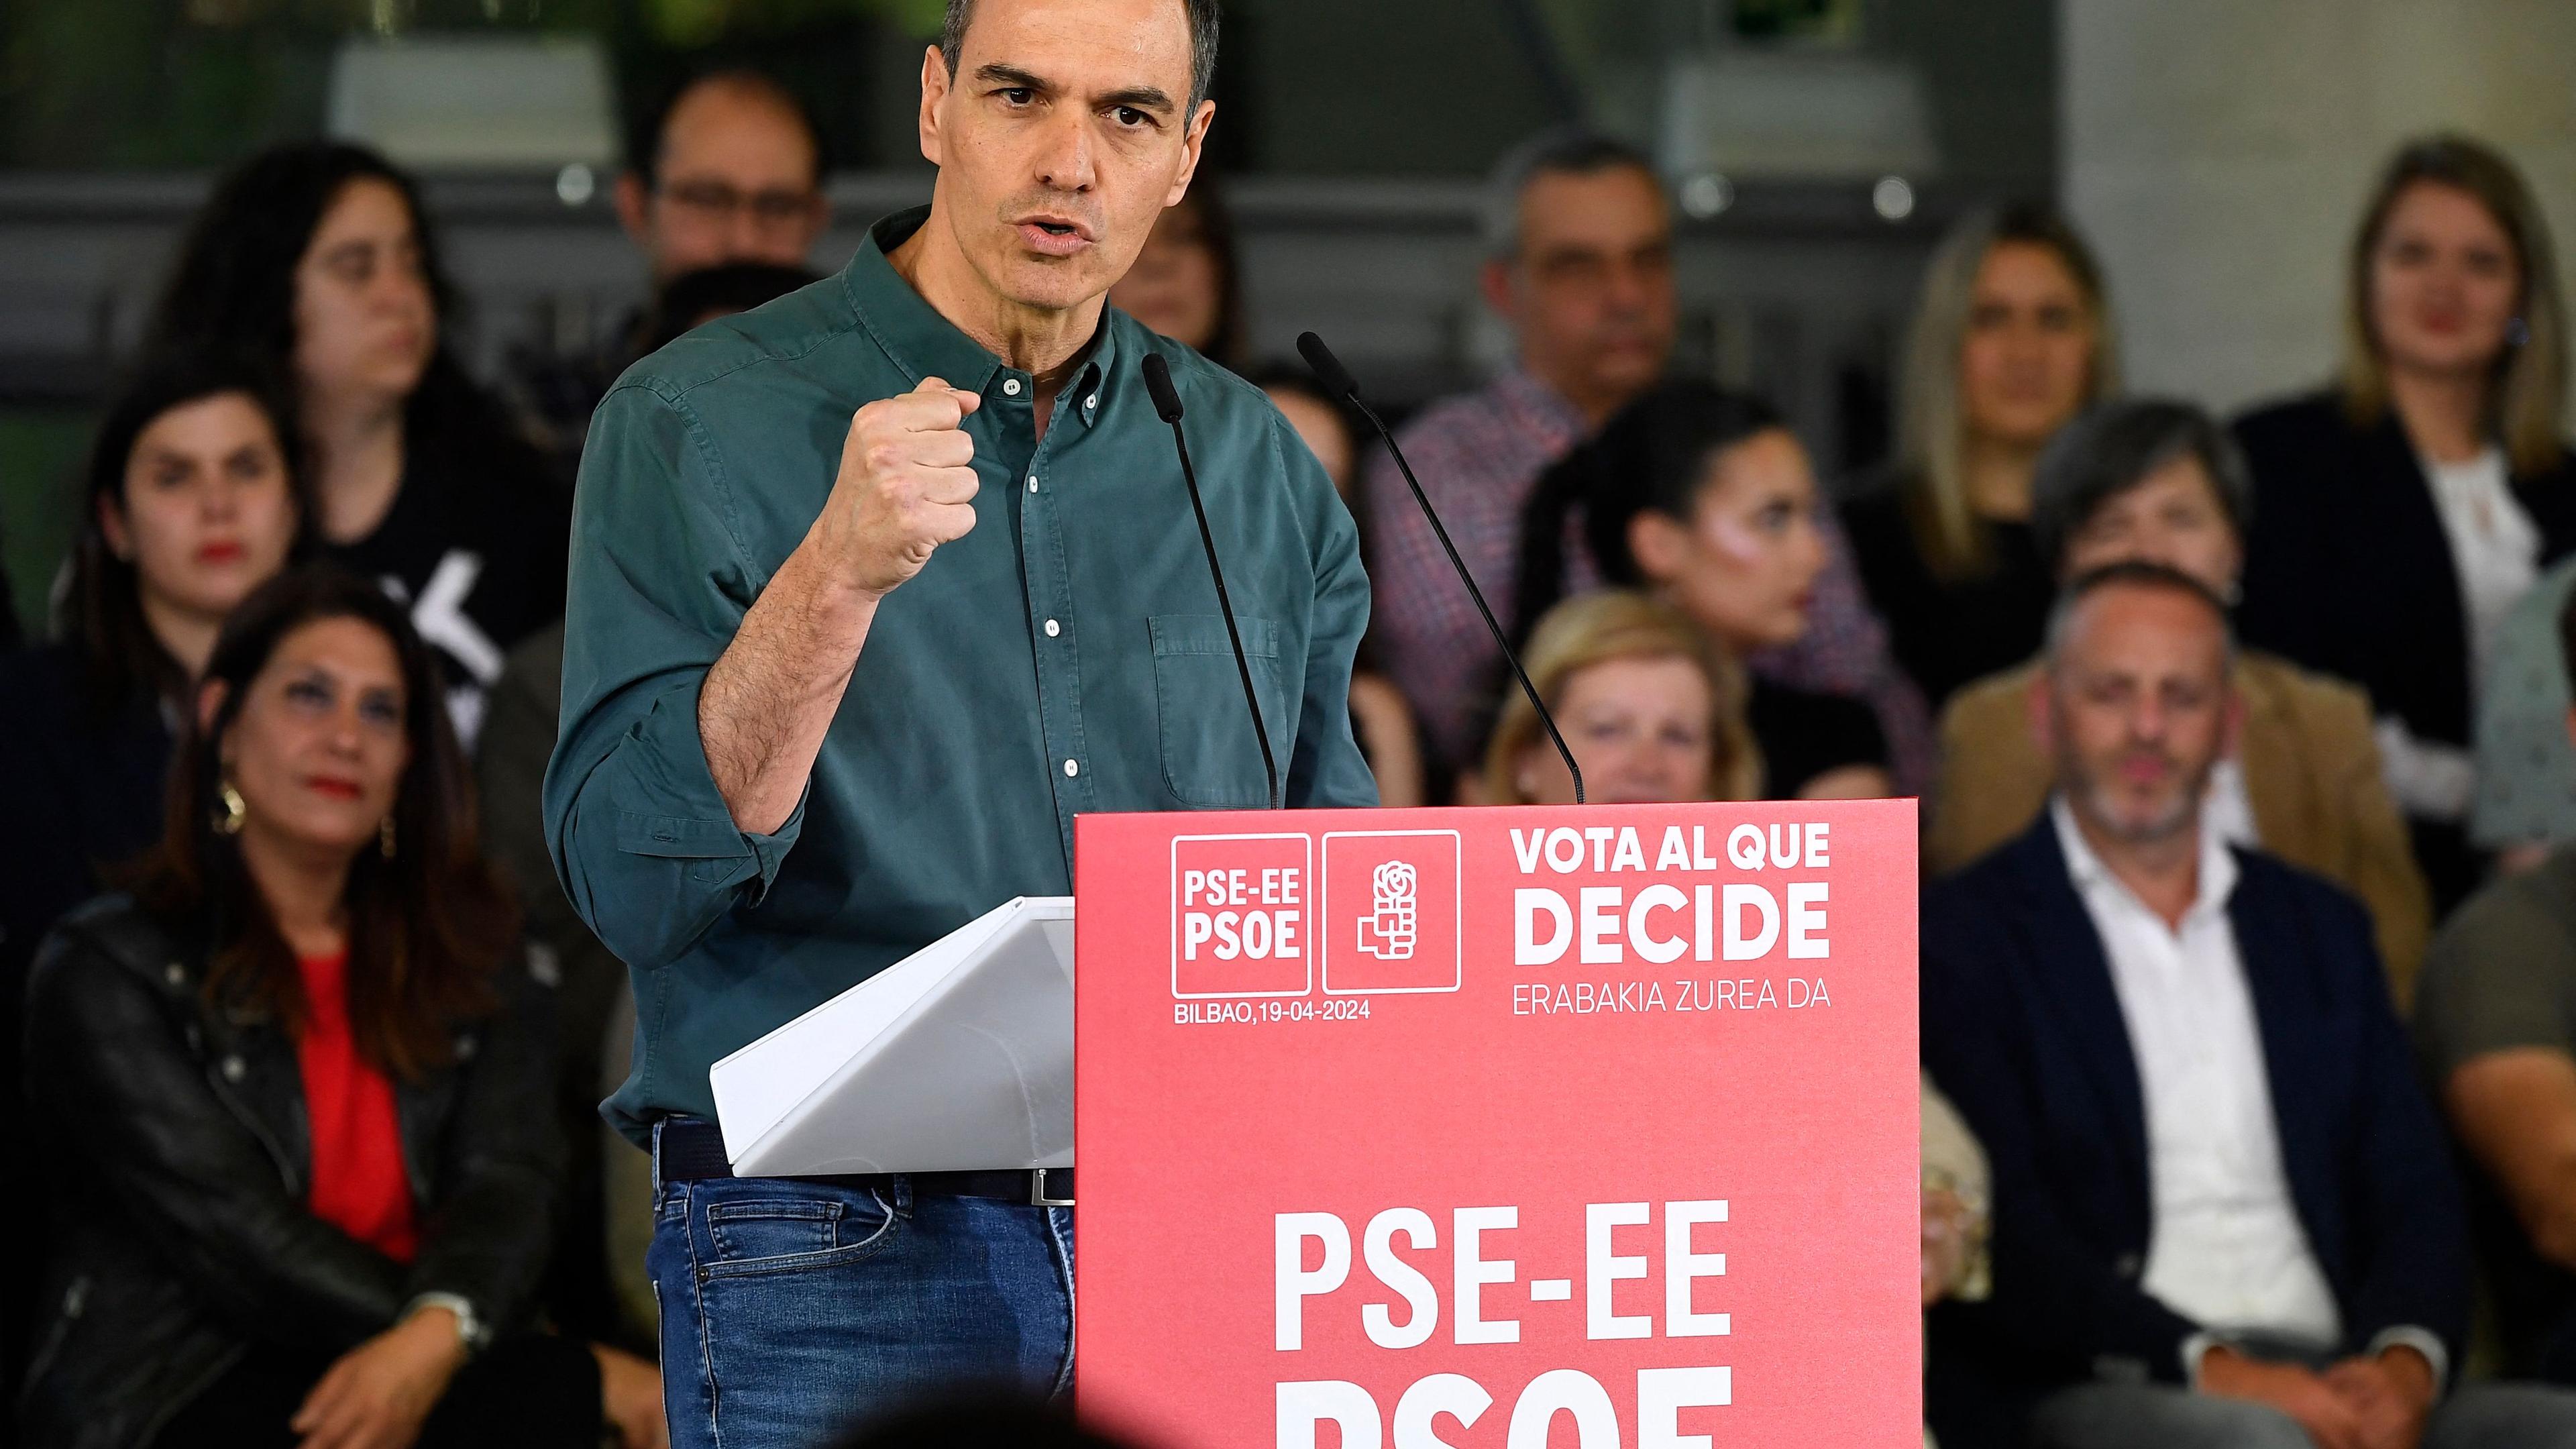 (FILES) Spanish Prime Minister Pedro Sanchez gestures as he delivers a speech during the Basque Socialist Party (PSE) closing campaign meeting in Bilbao on April 19, 2024 ahead of regional elections in the Basque Country. Spain's Pedro Sanchez said on April 29, 2024 he would stay on as Prime Minister after threatening to stand down over what he has denounced as a campaign of political harassment by the right. (Photo by ANDER GILLENEA / AFP)